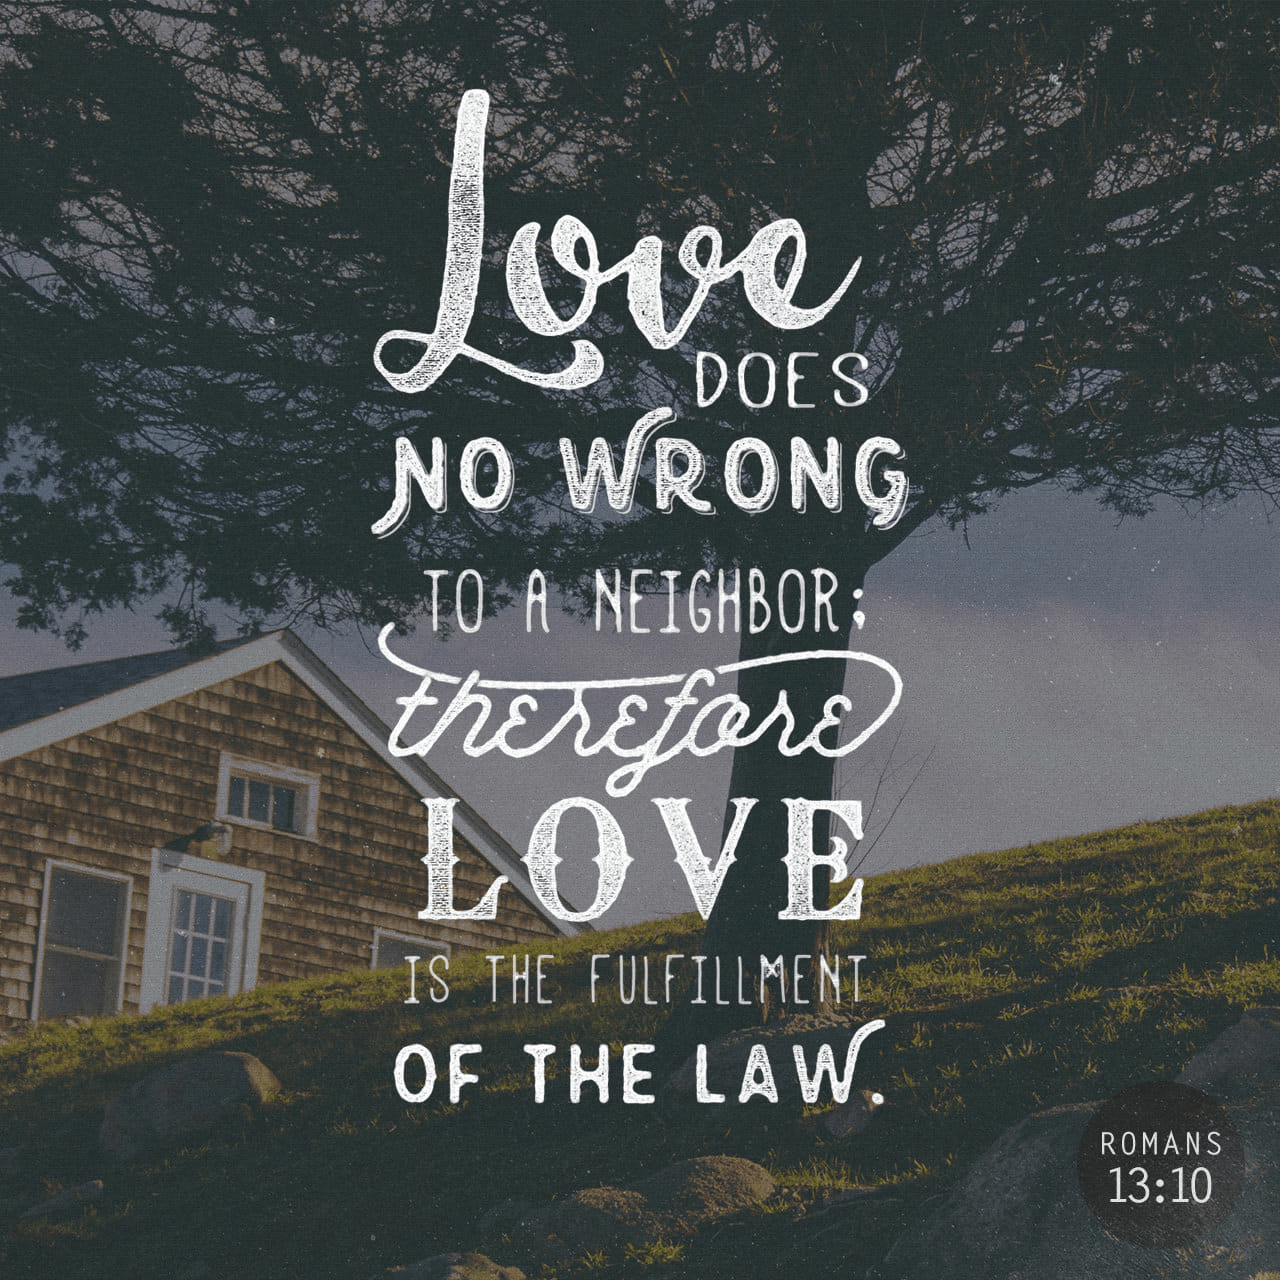 VOTD January 5 - “Love does no wrong to a neighbor; therefore love is the fulfillment of the law.” ‭‭Romans‬ ‭13:10‬ ‭NASB‬‬